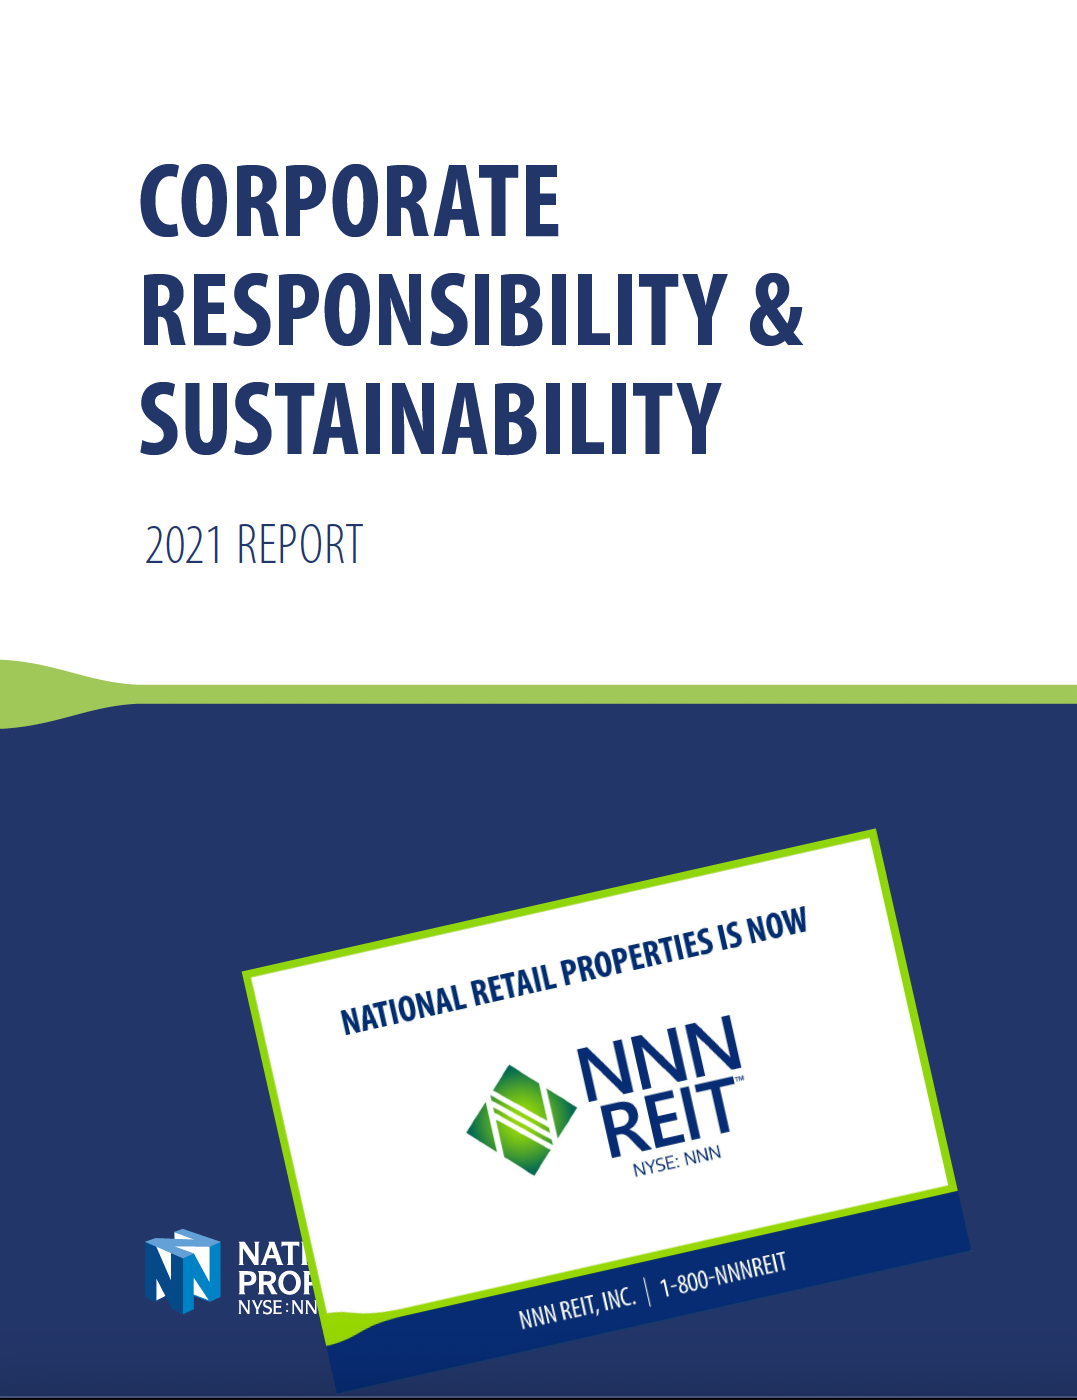 NNN Corporate Responsibility & Sustainability Report 2021